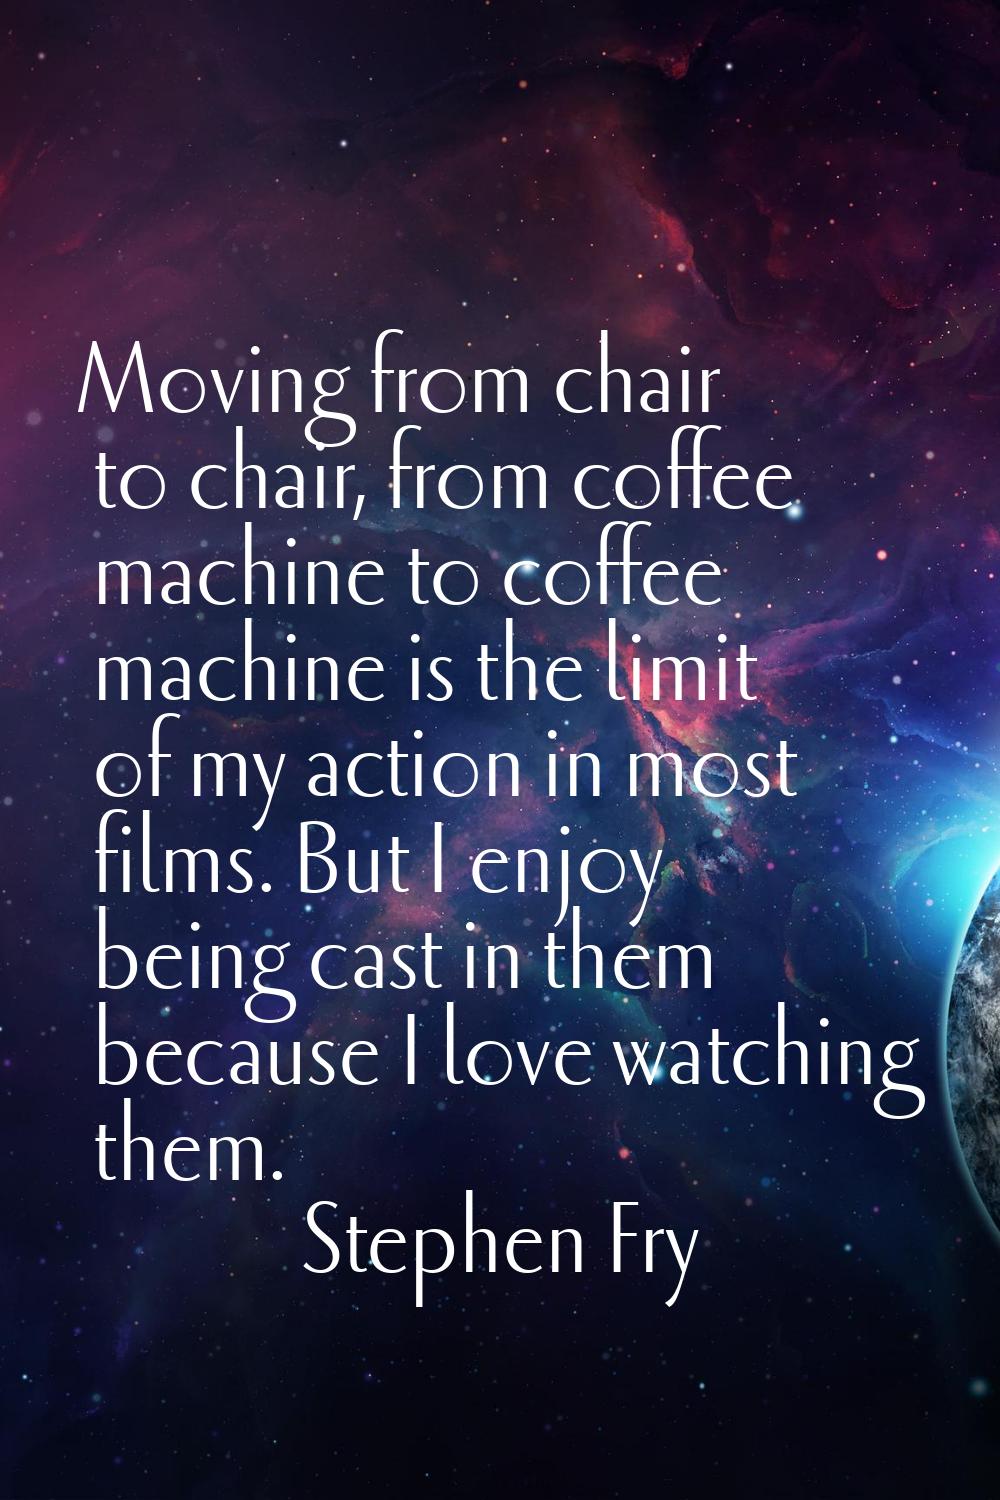 Moving from chair to chair, from coffee machine to coffee machine is the limit of my action in most